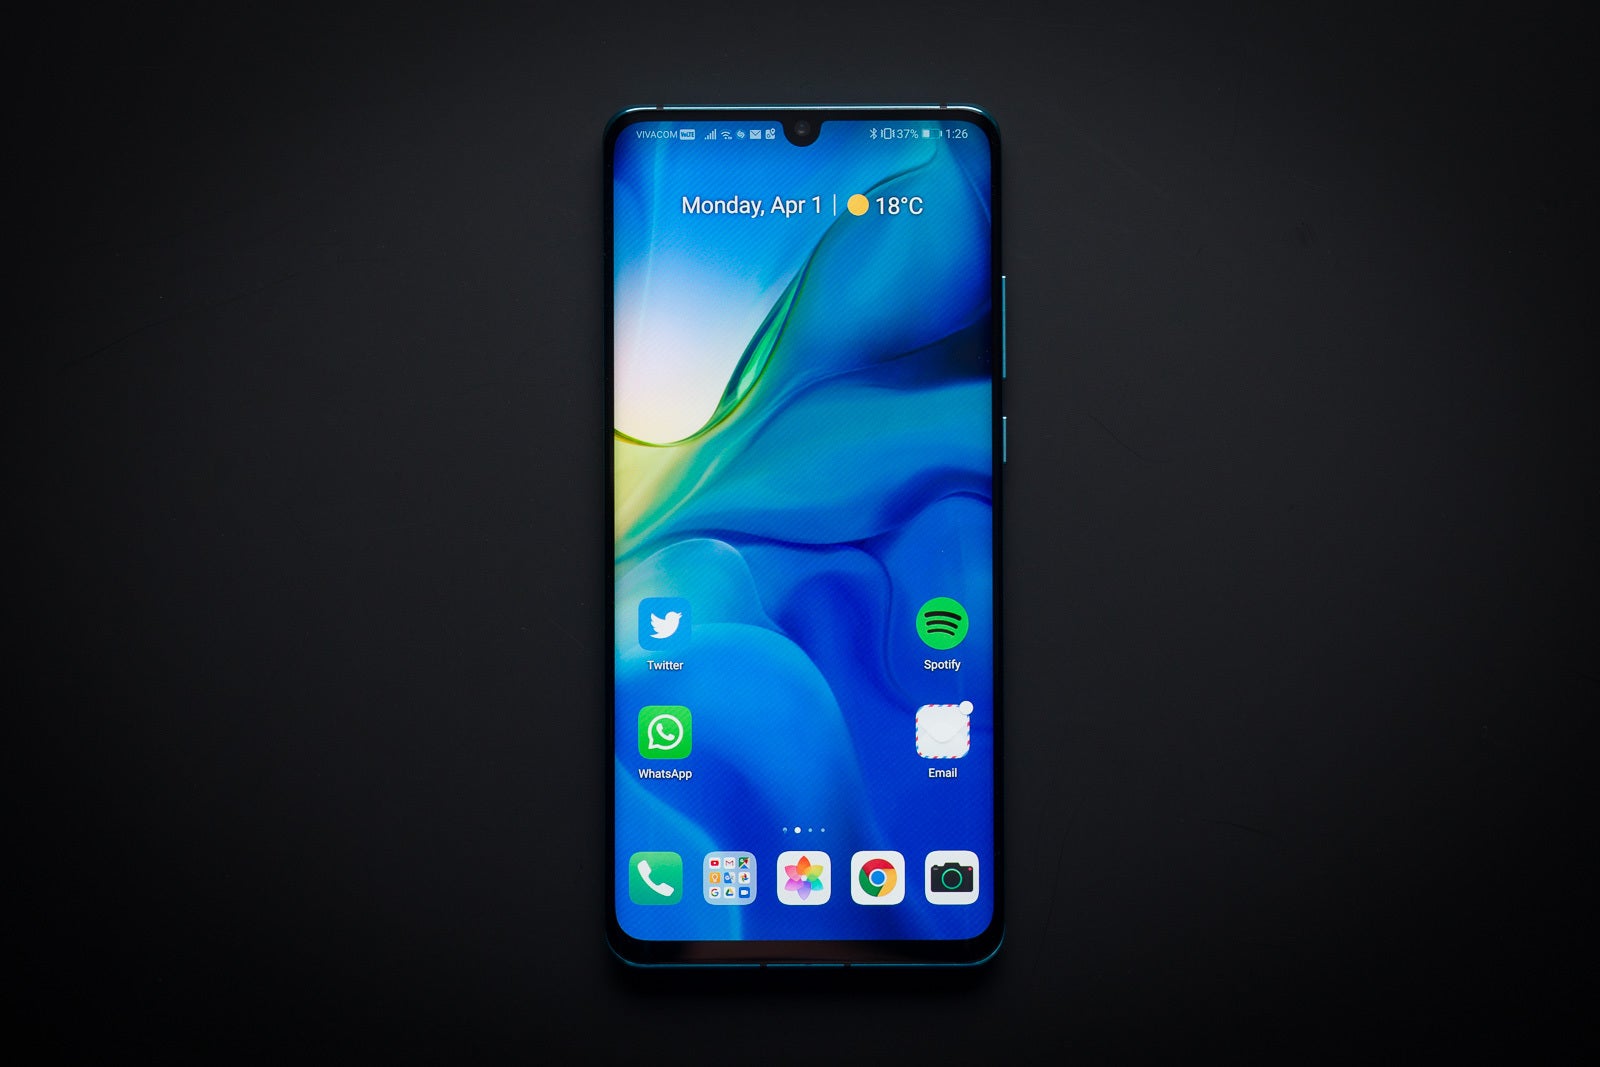 Huawei's P30 Pro is now just £23/month at EE with 30GB of data